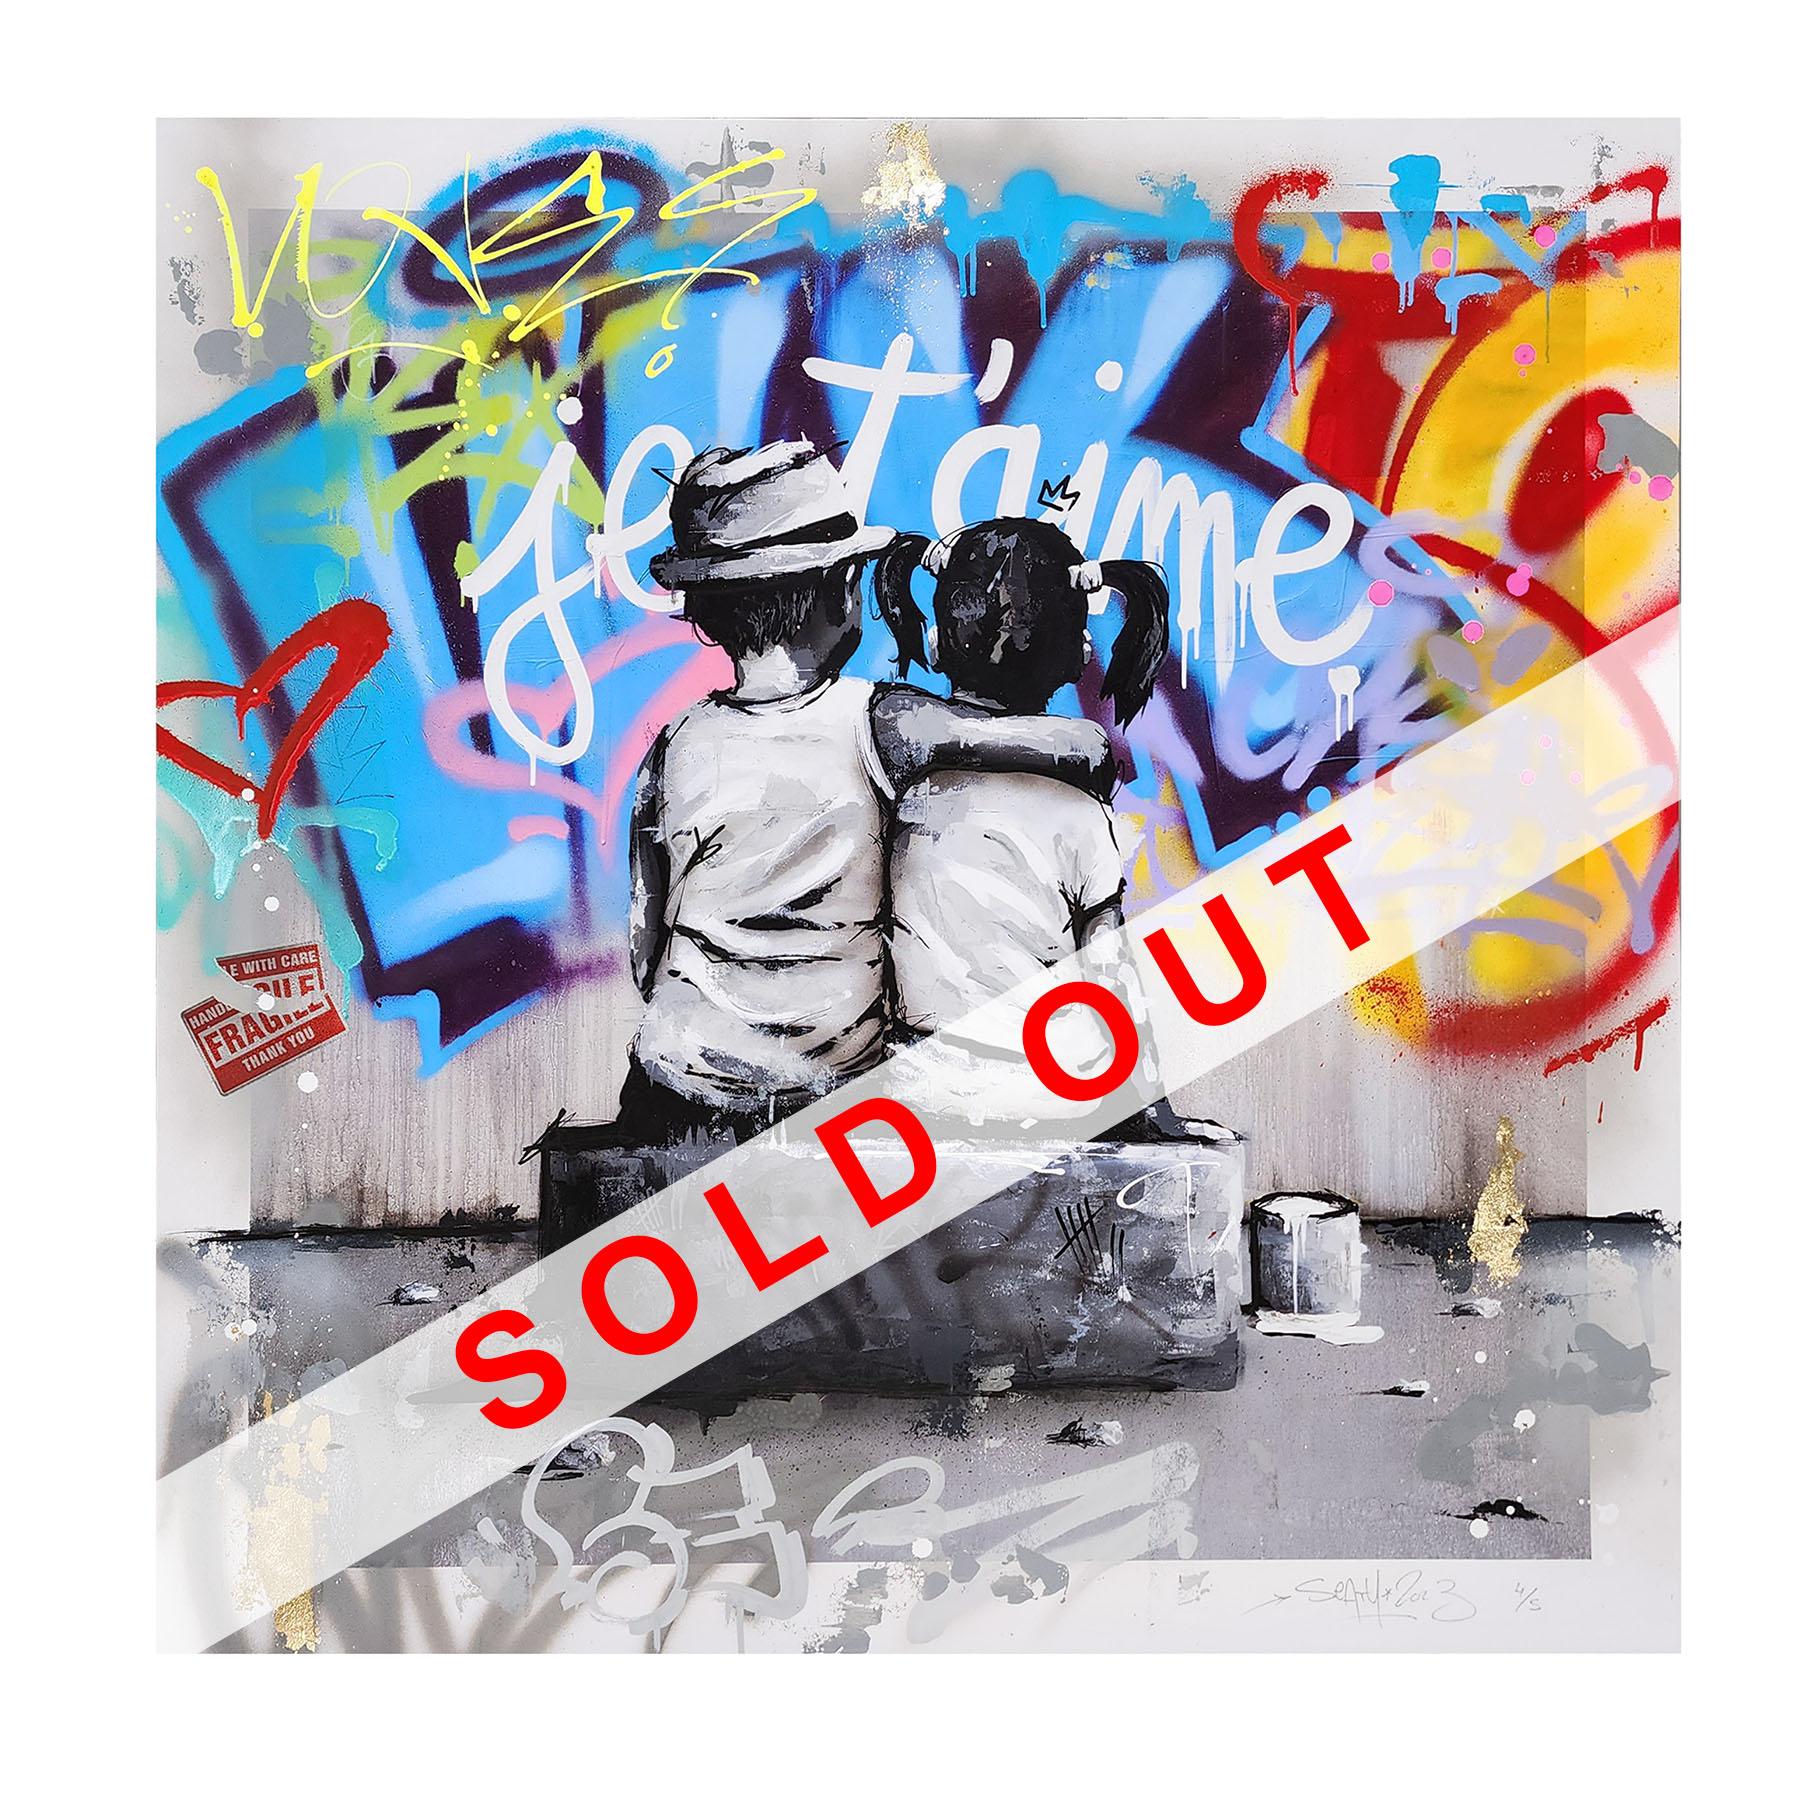 Sold out site re cupe re 1